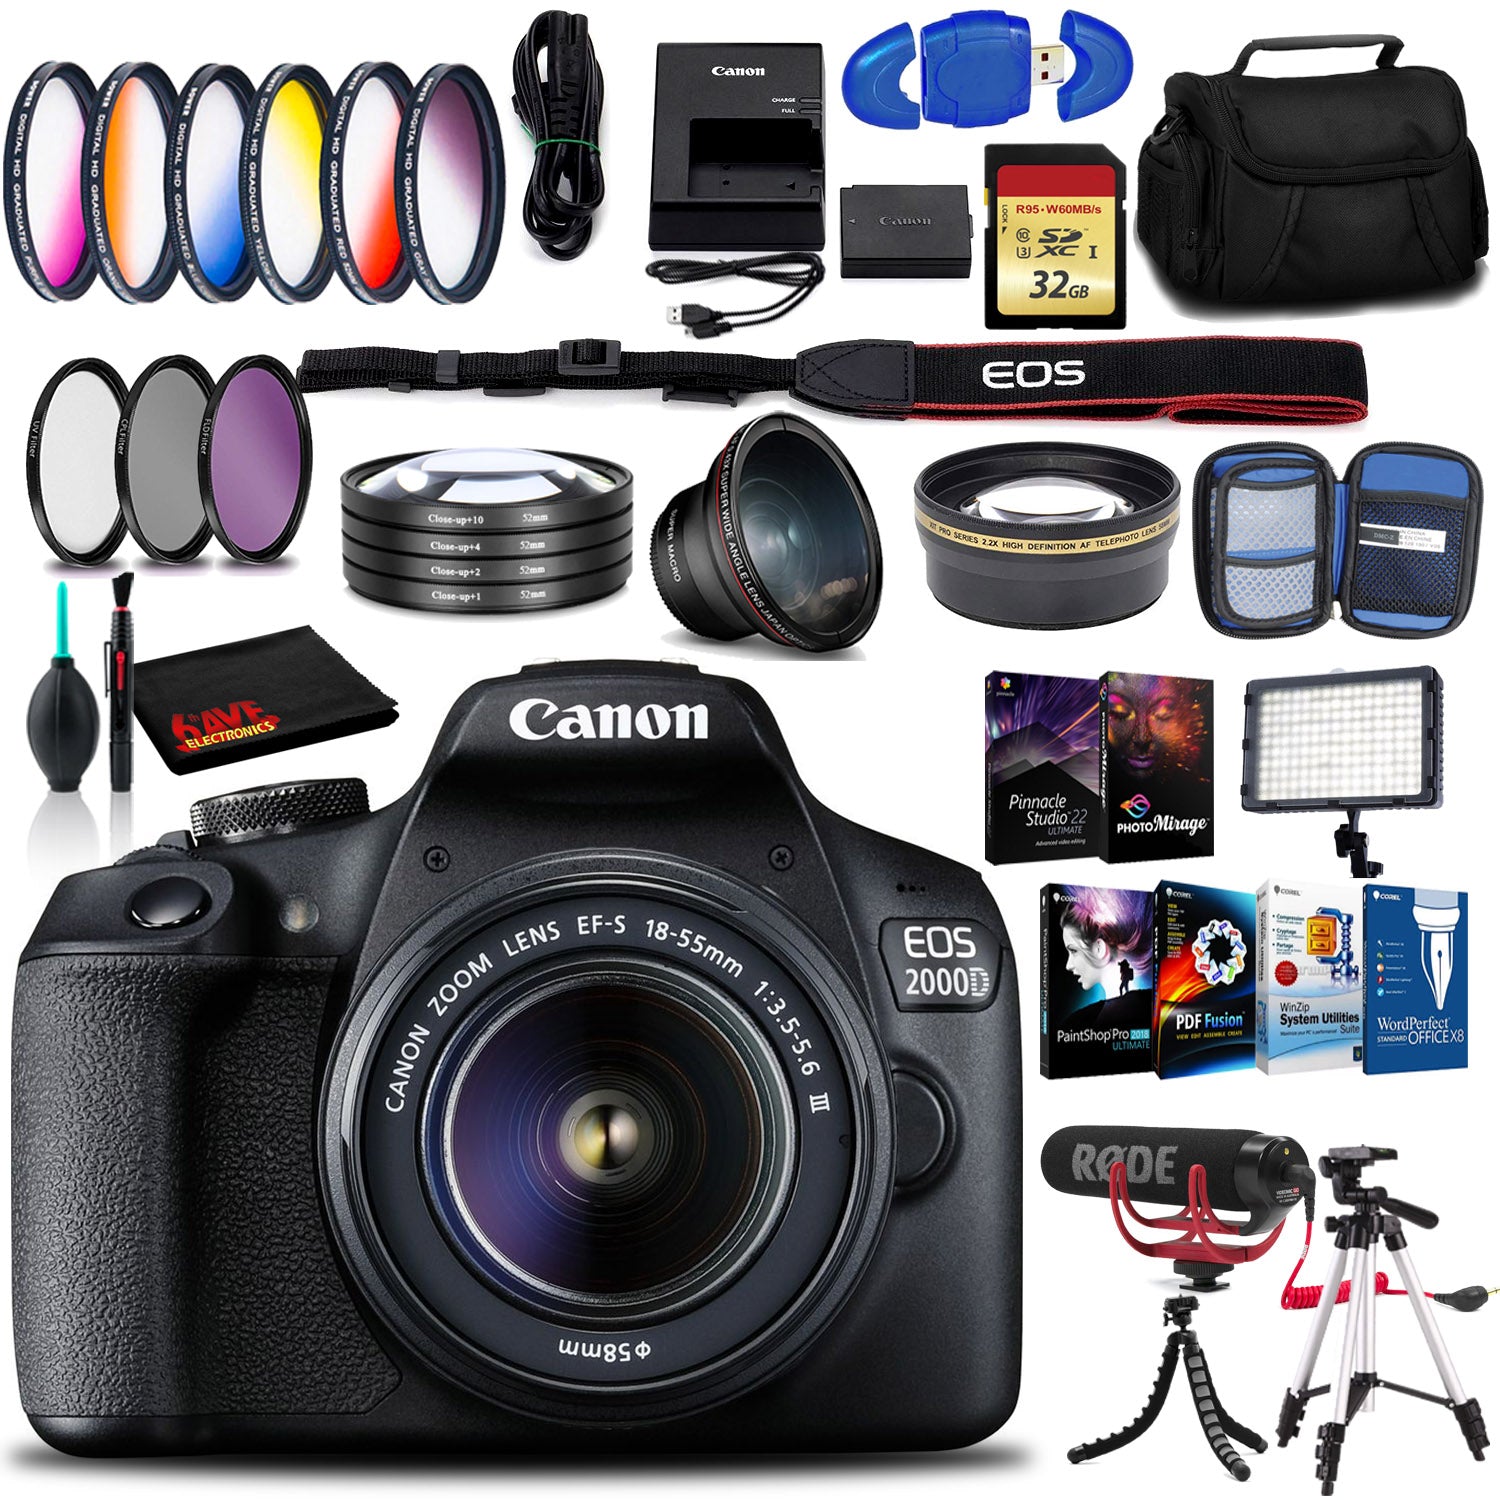 Canon EOS 2000D DSLR Camera with EF-S 18-55 mm f/3.5-5.6 III Lens (Intl Model) with Memory Kit, Mic, LED Light, and More